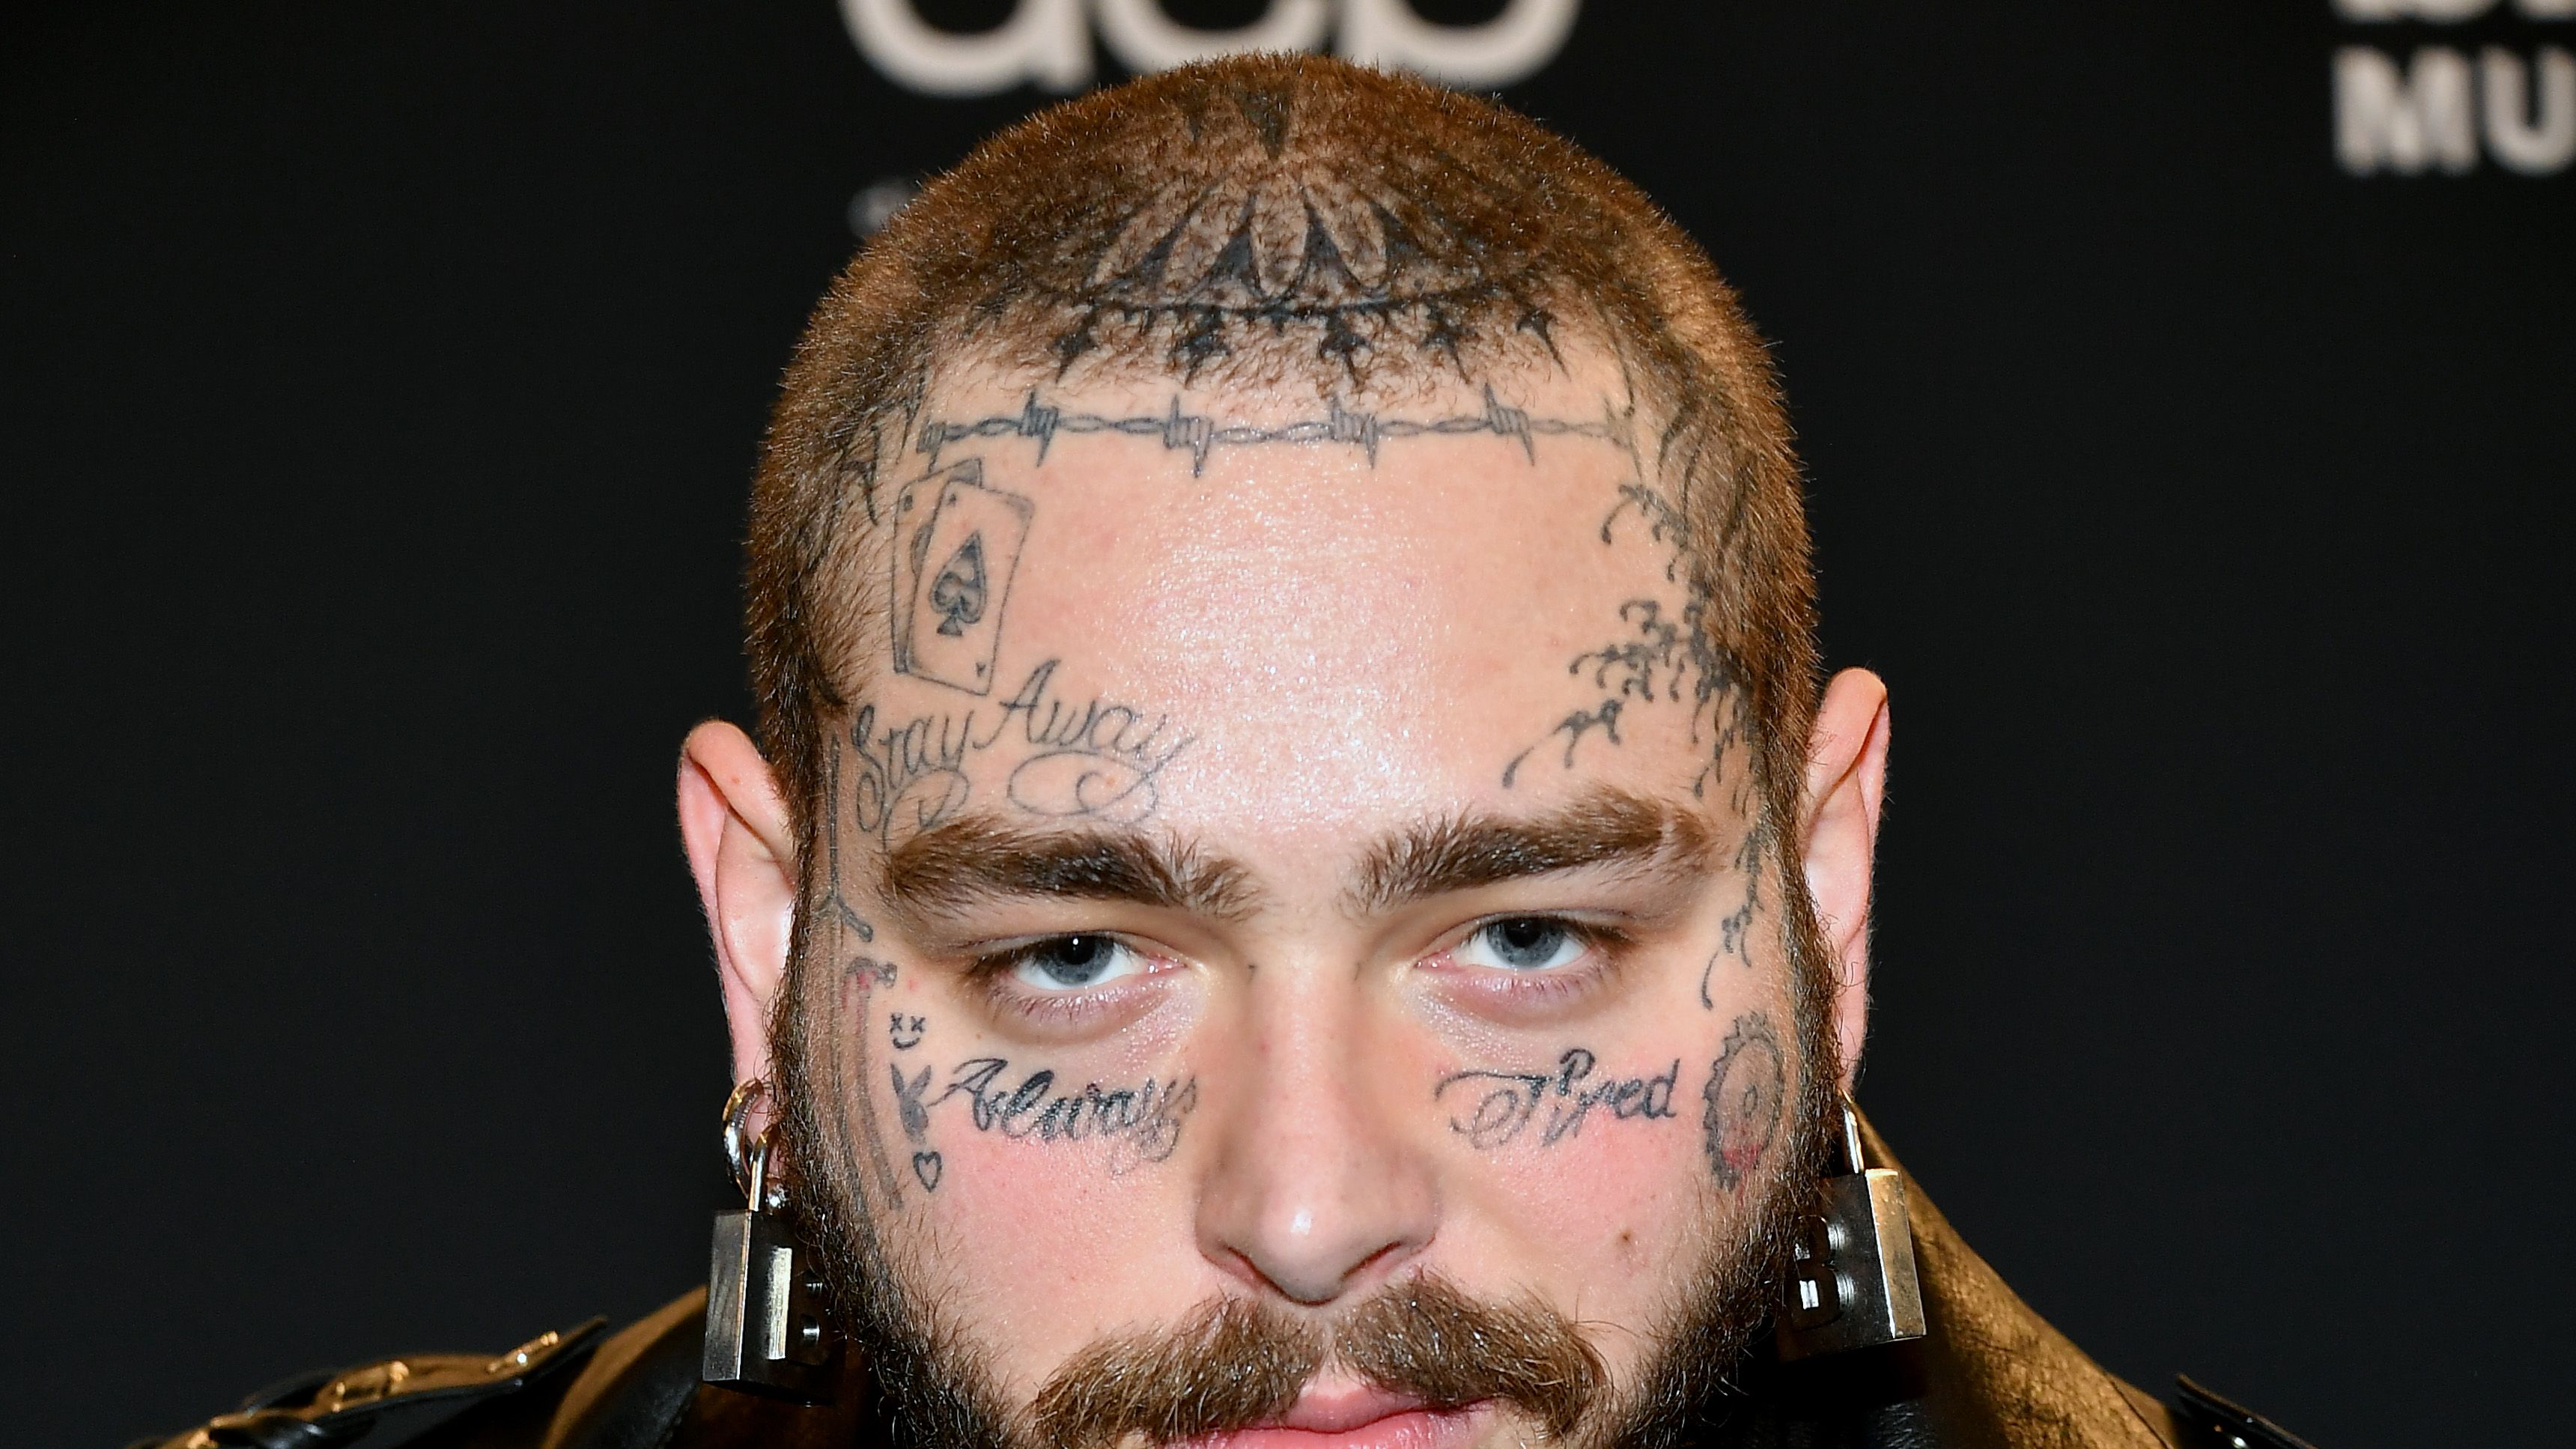 Post Malone Tattoos Every Post Malone Tattoo Meaning Explained ...